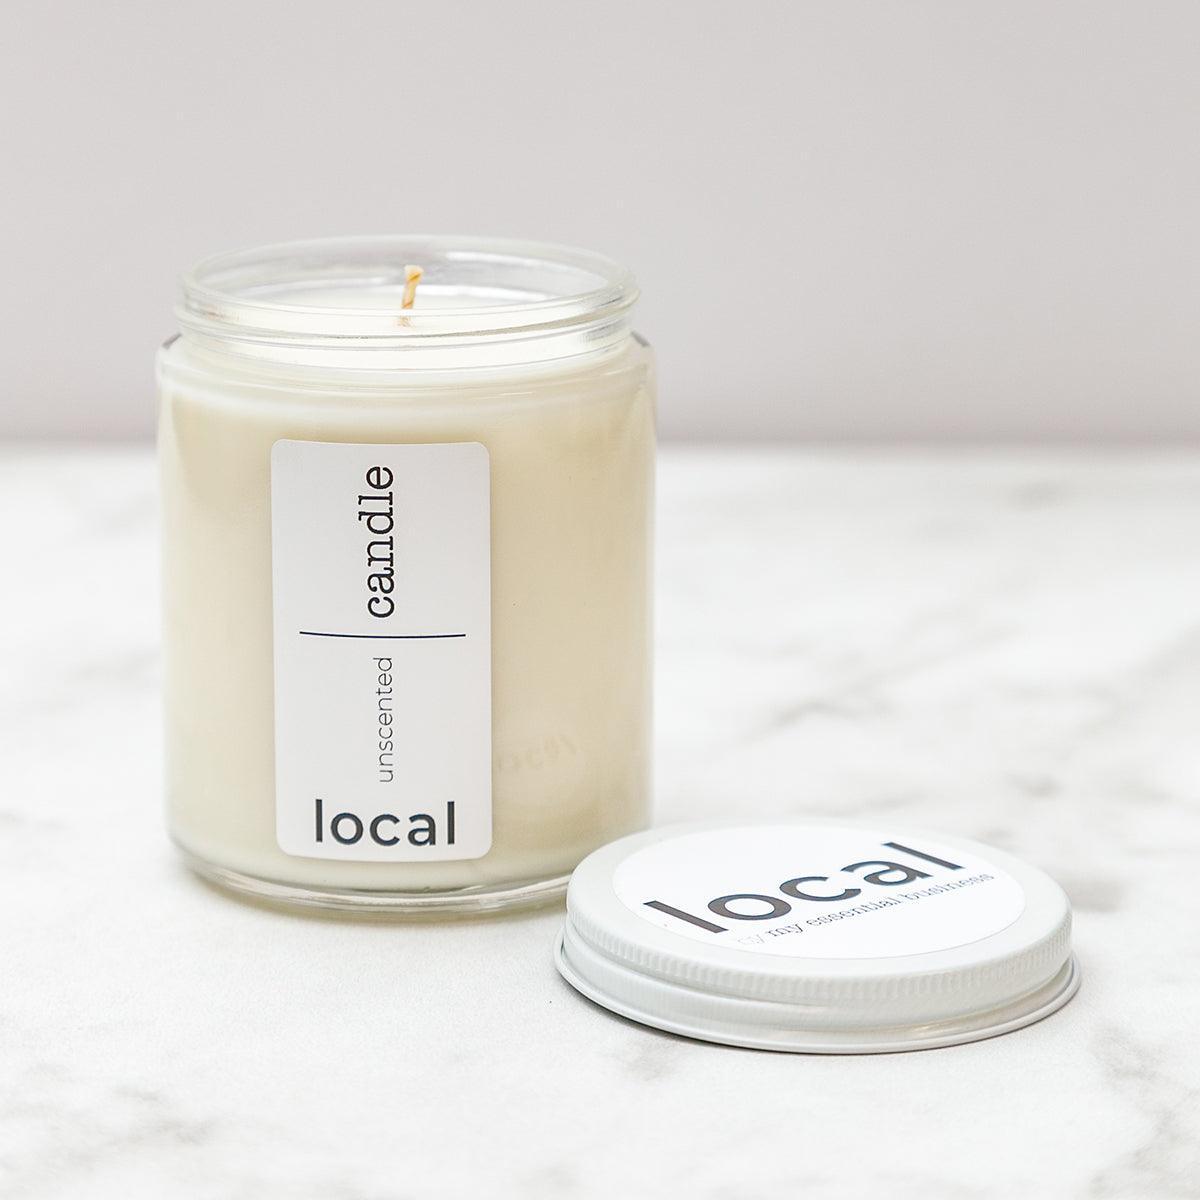 local candle - rosemary lavender - local - letsbelocal.ca